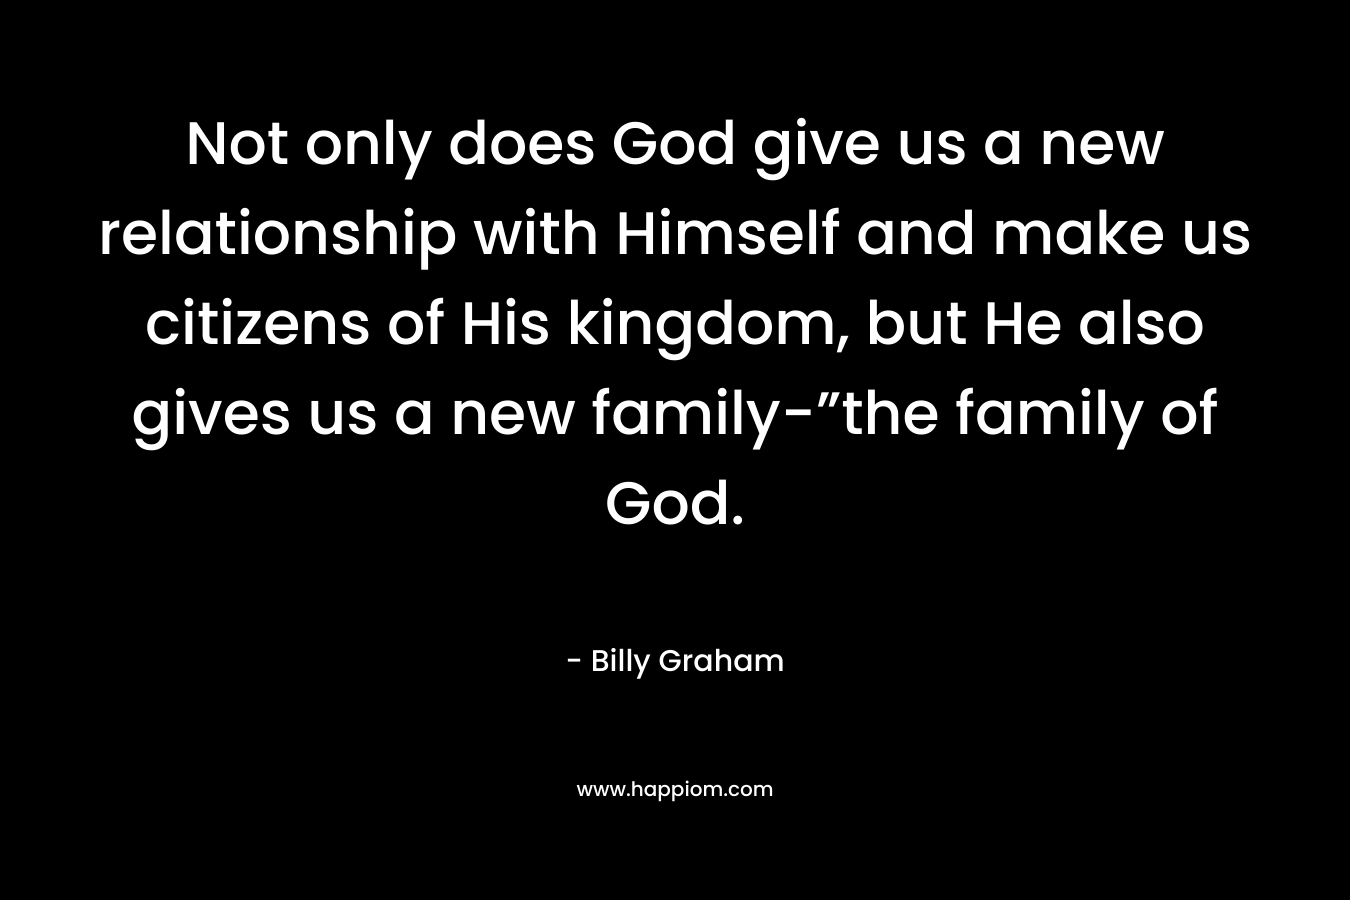 Not only does God give us a new relationship with Himself and make us citizens of His kingdom, but He also gives us a new family-”the family of God.